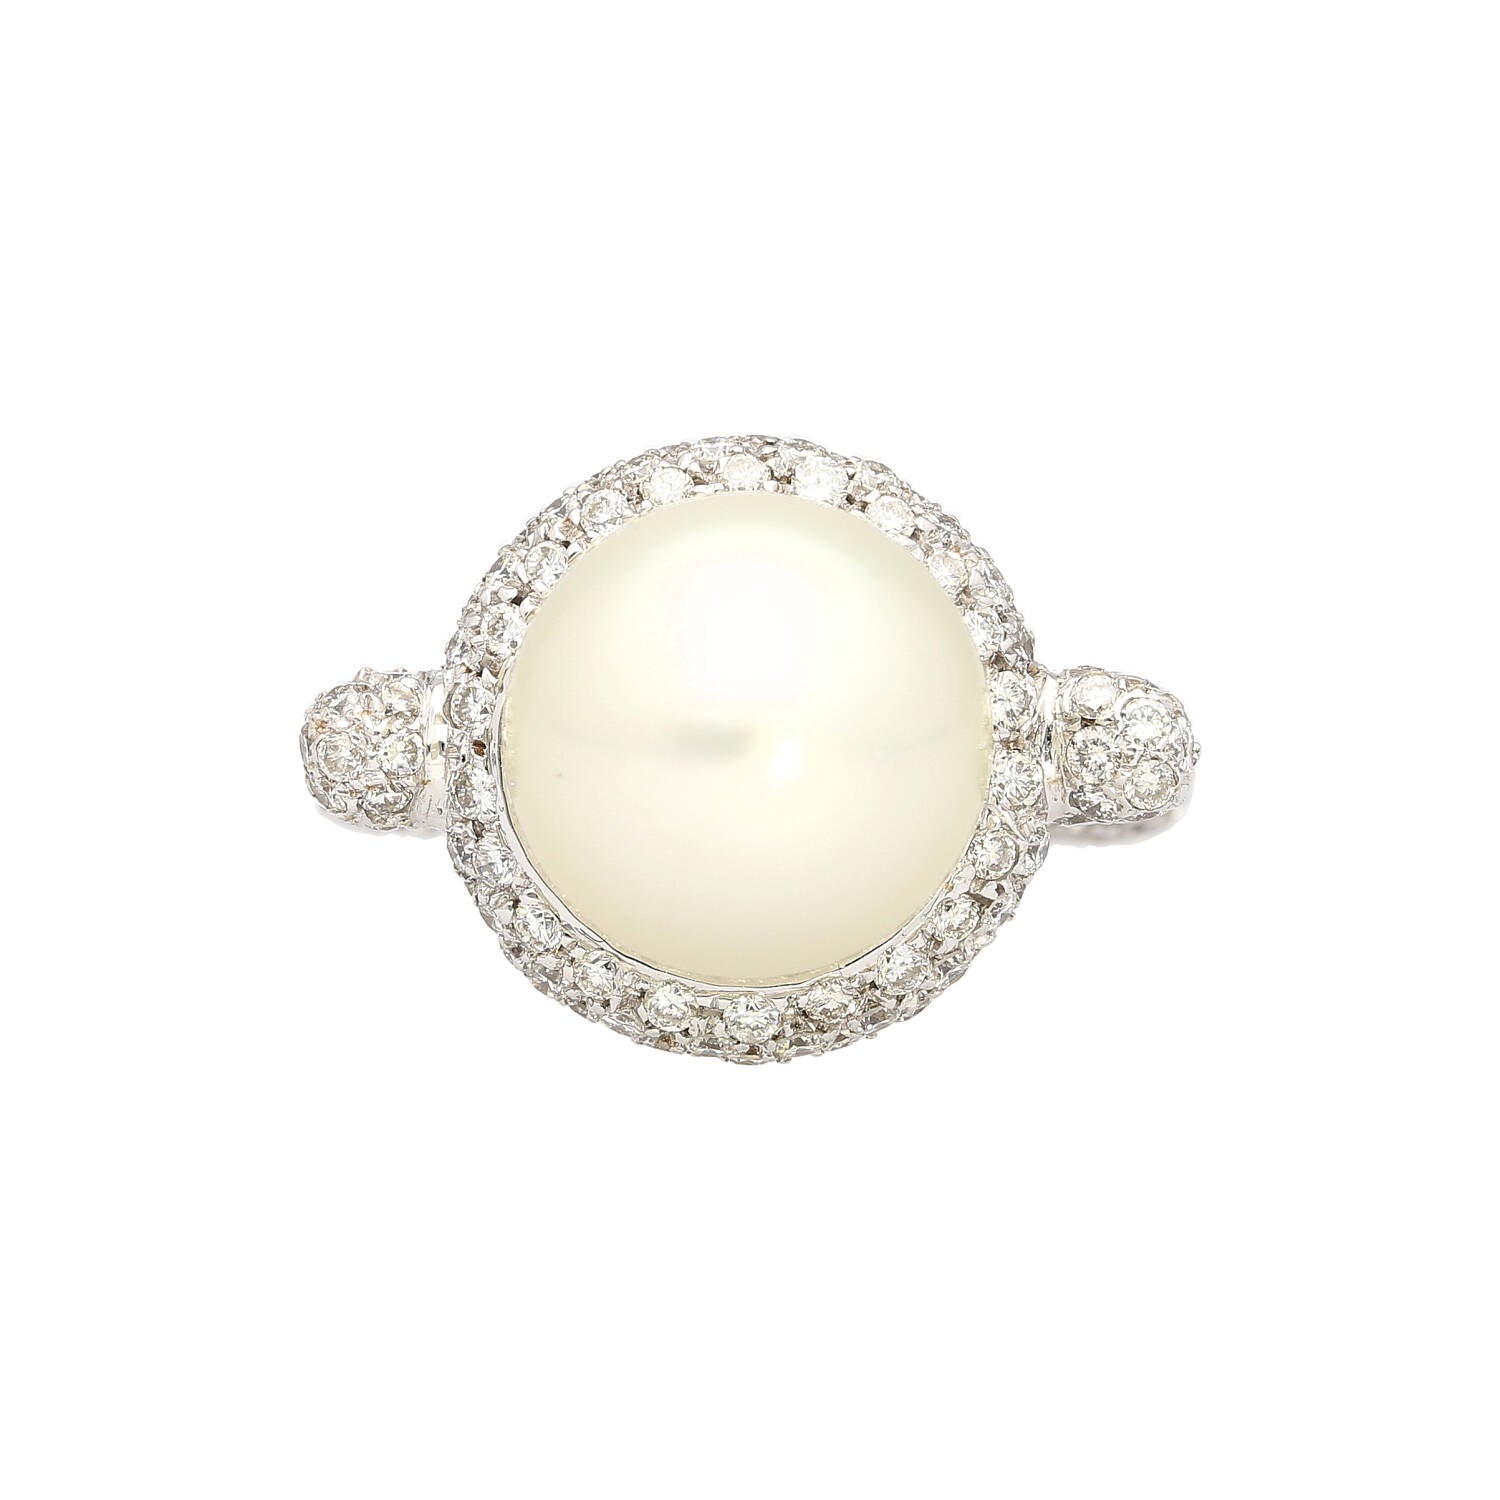 12_3MM-SouthSea-White-Pearl-and-Round-Cut-Pave-Diamond-Ring-in-18k-White-Gold-Rings.jpg